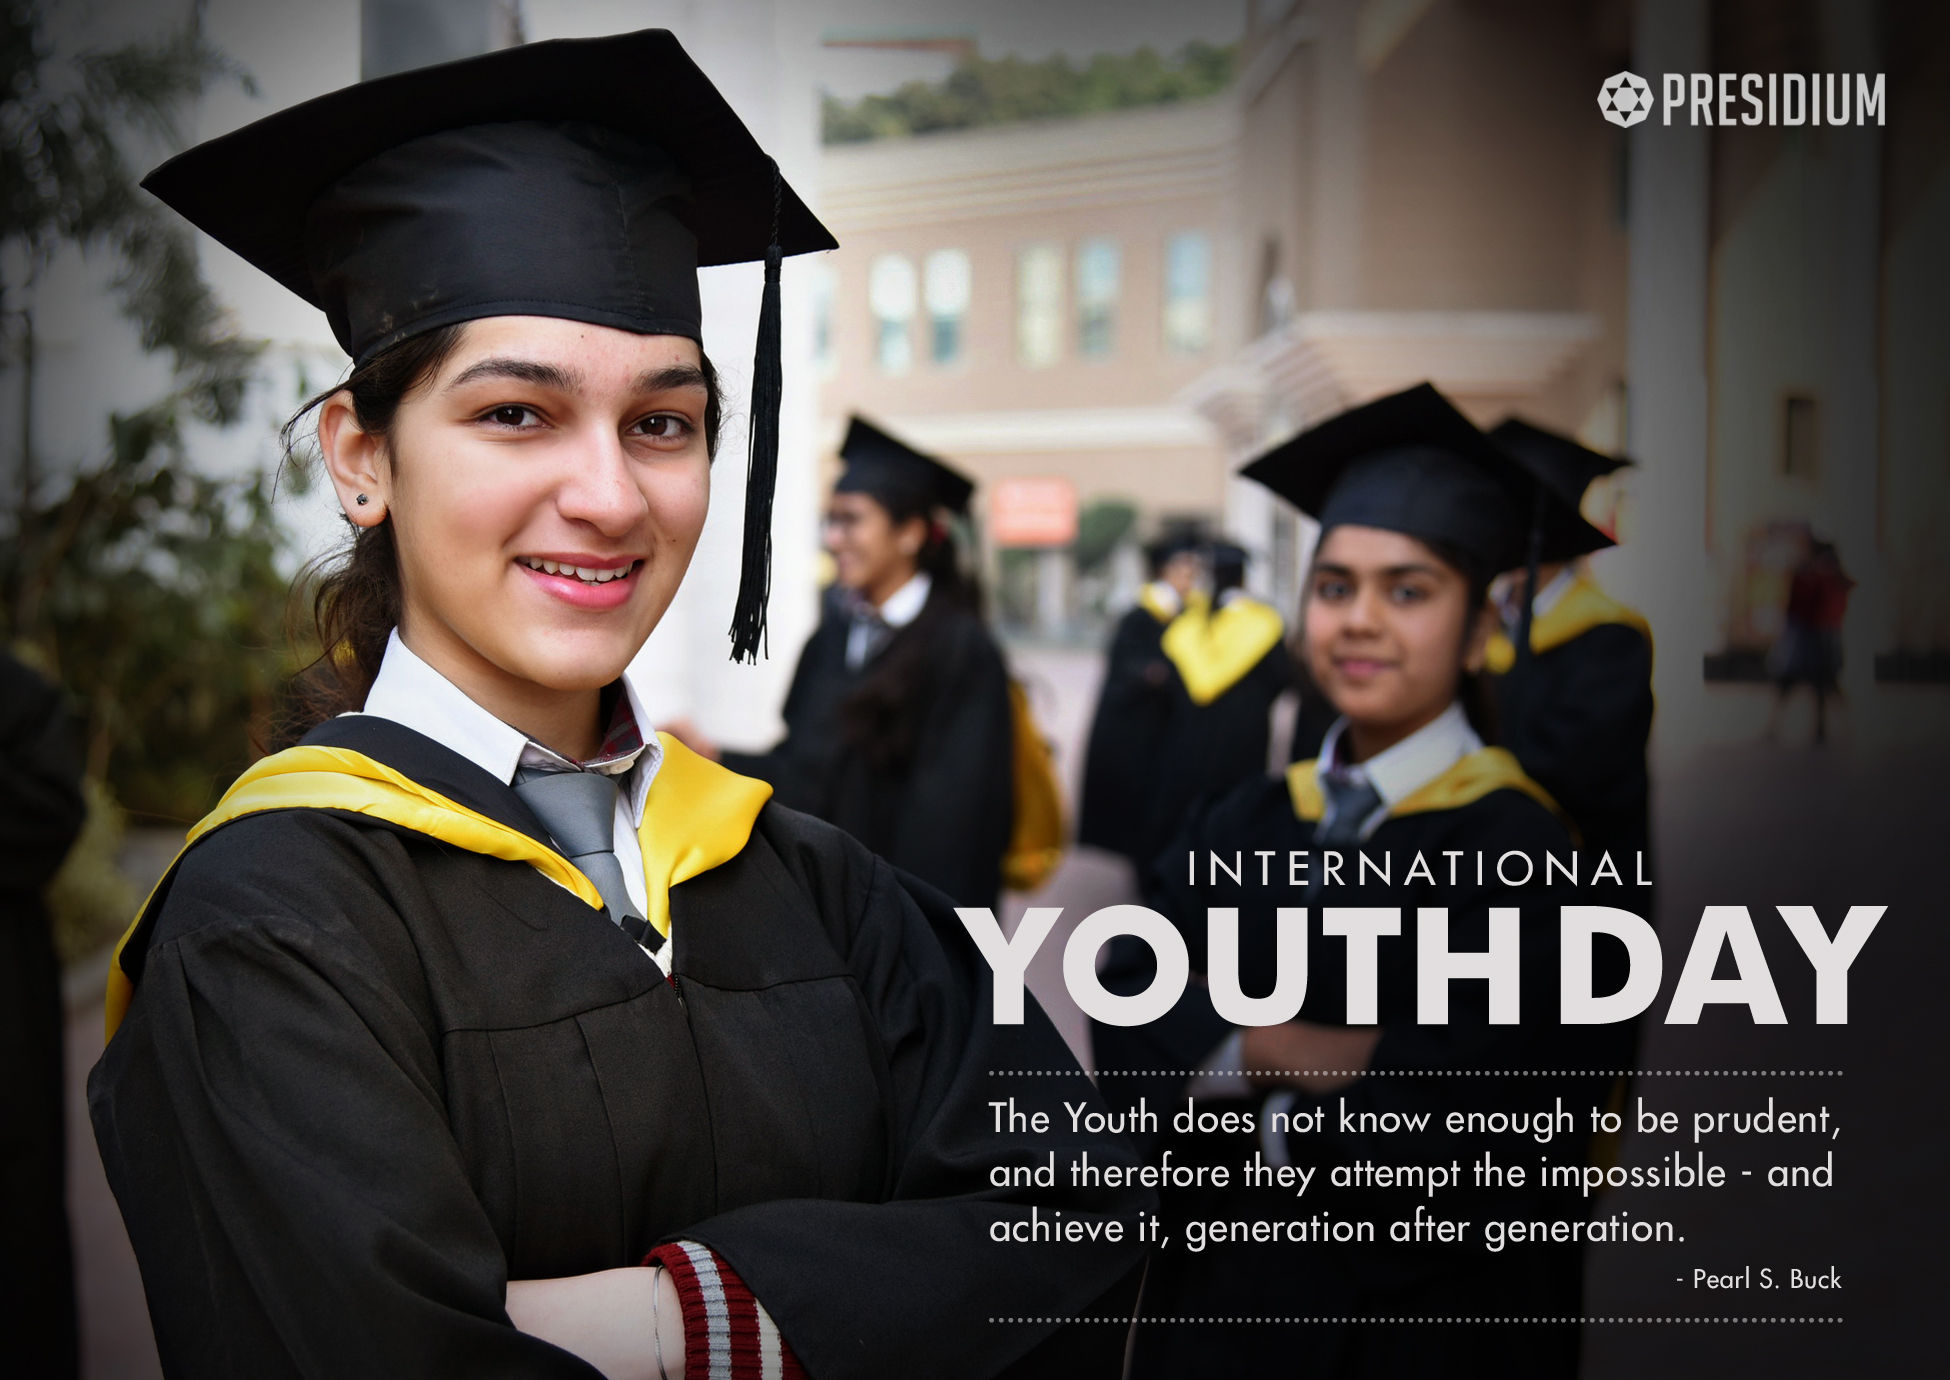 PRESIDIUM WISHES ALL YOUNG LEADERS, HAPPY INTERNATIONAL YOUTH DAY